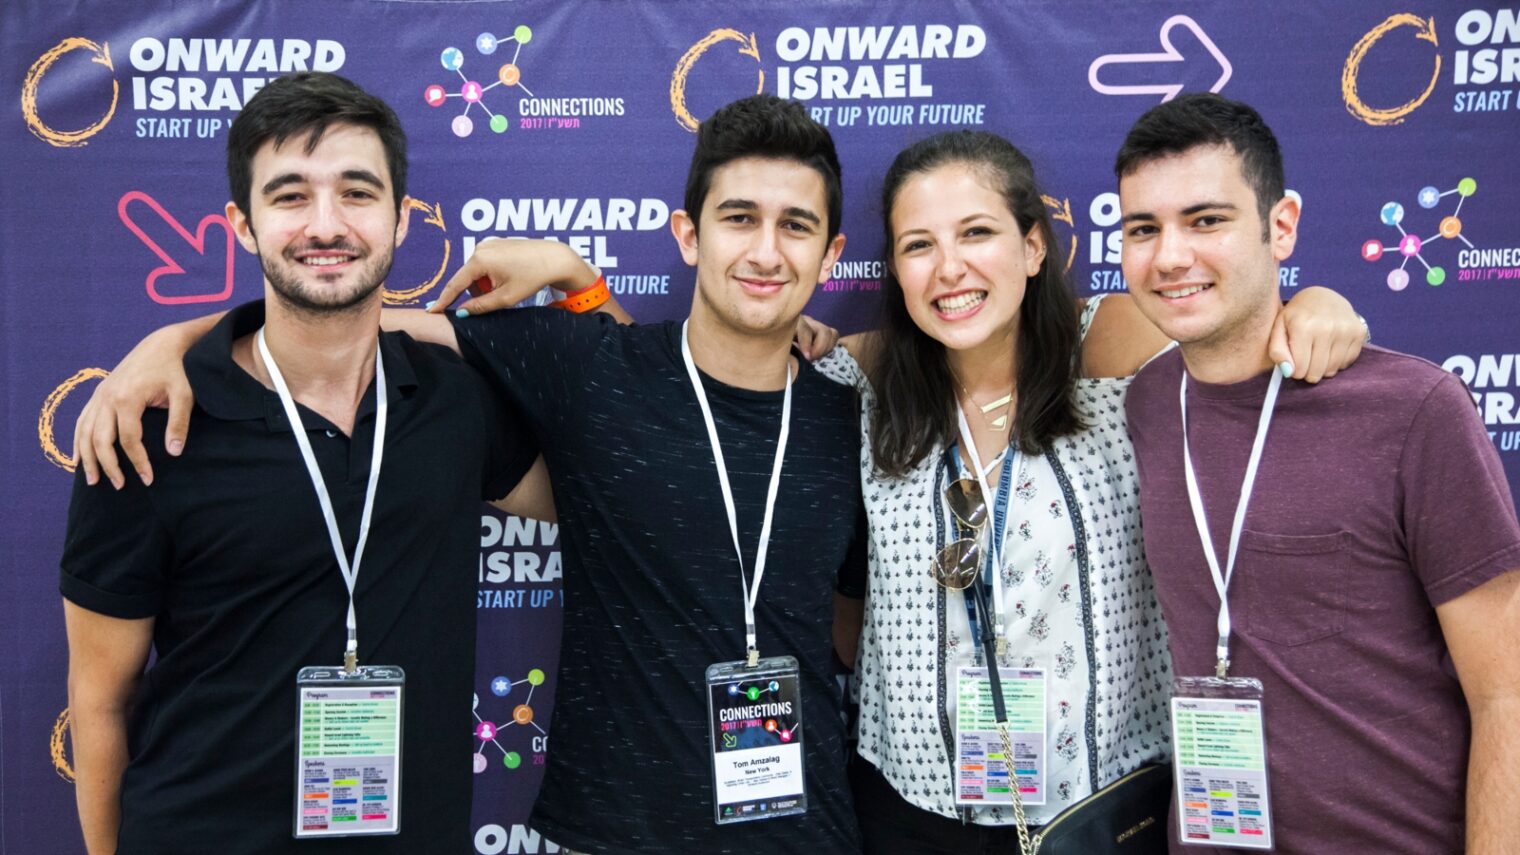 Participants meet up at Onward Israel’s summer Connections event. Photo: courtesy